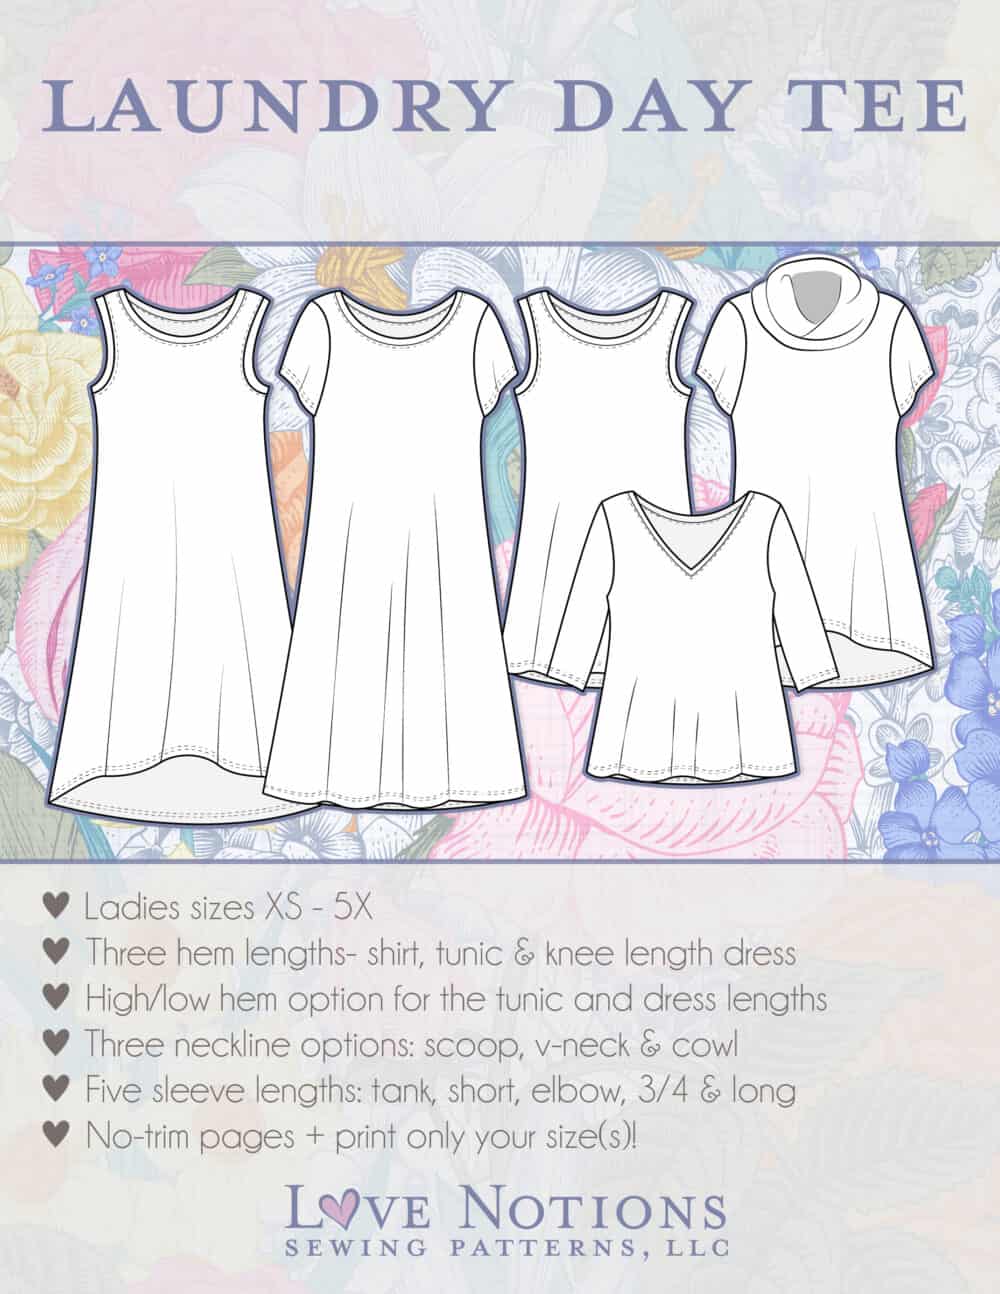 Blog - Love Notions Sewing Patterns